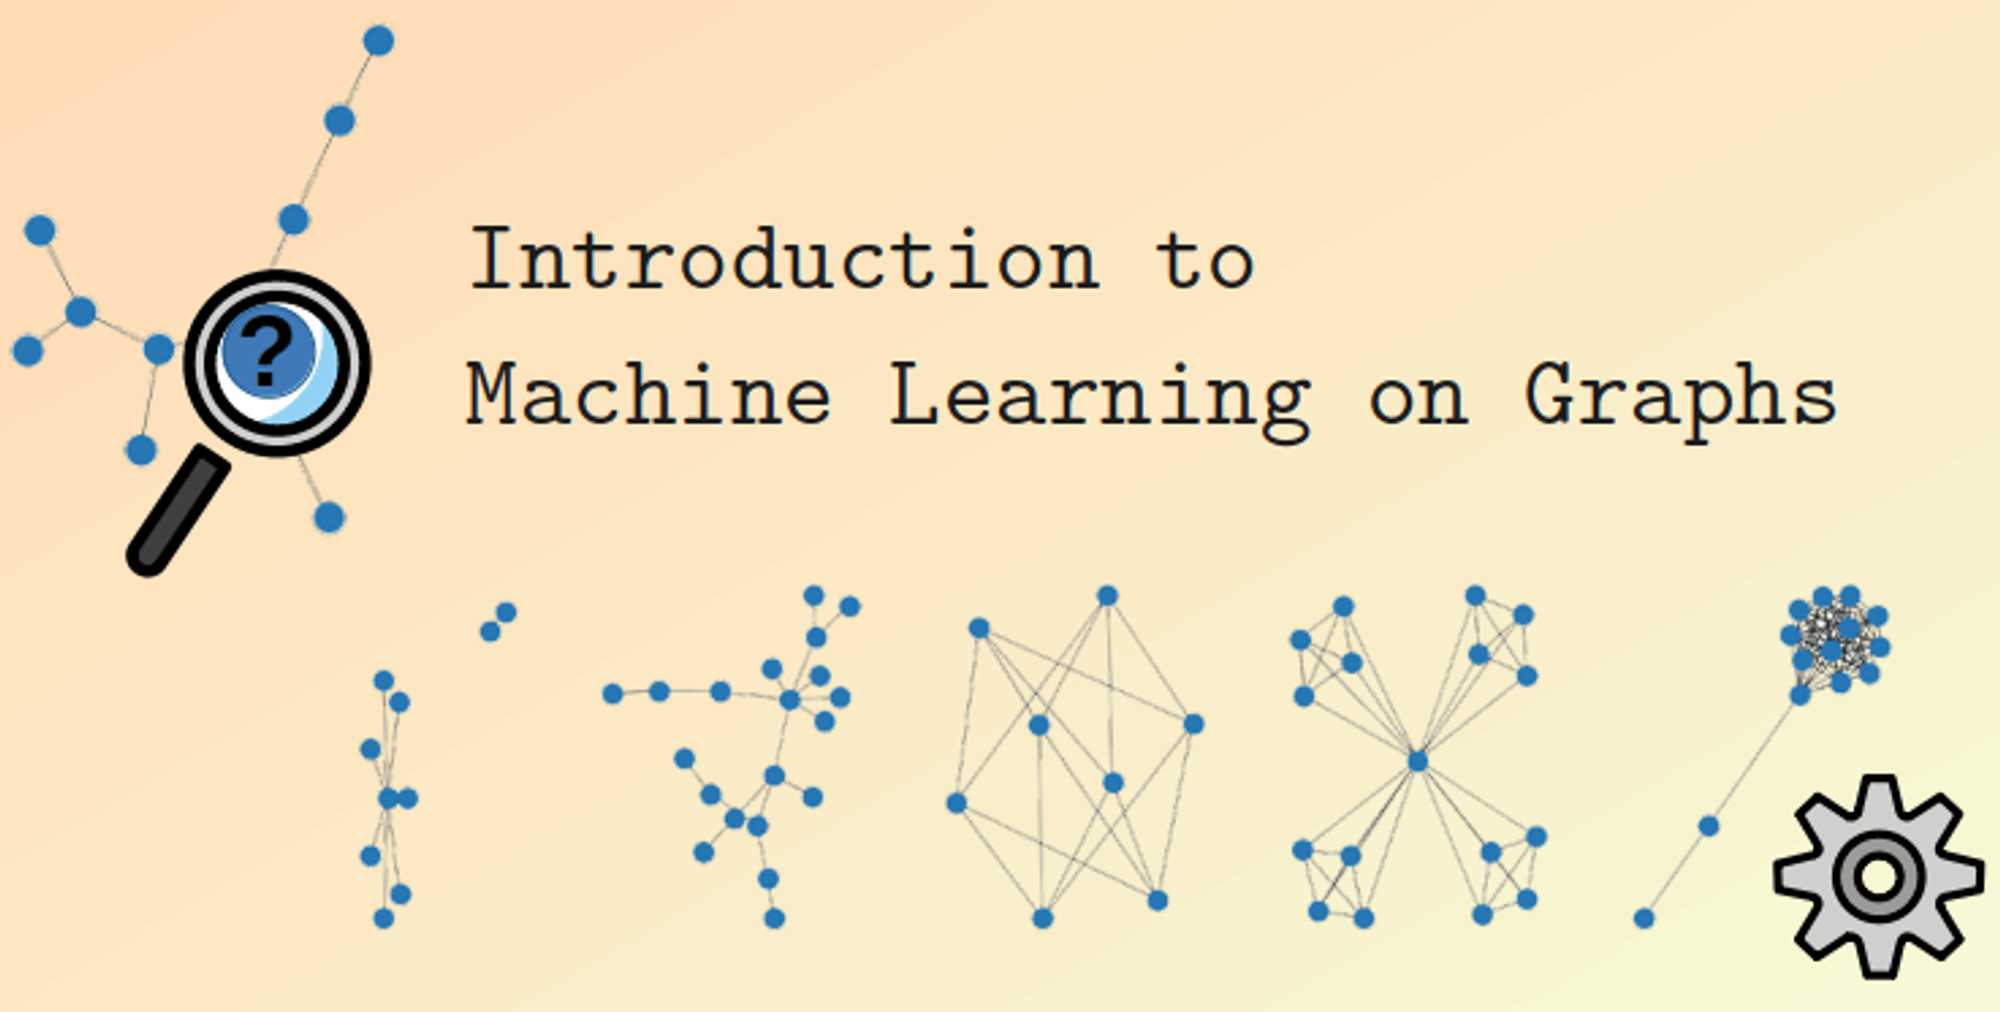 Introduction to Graph Machine Learning